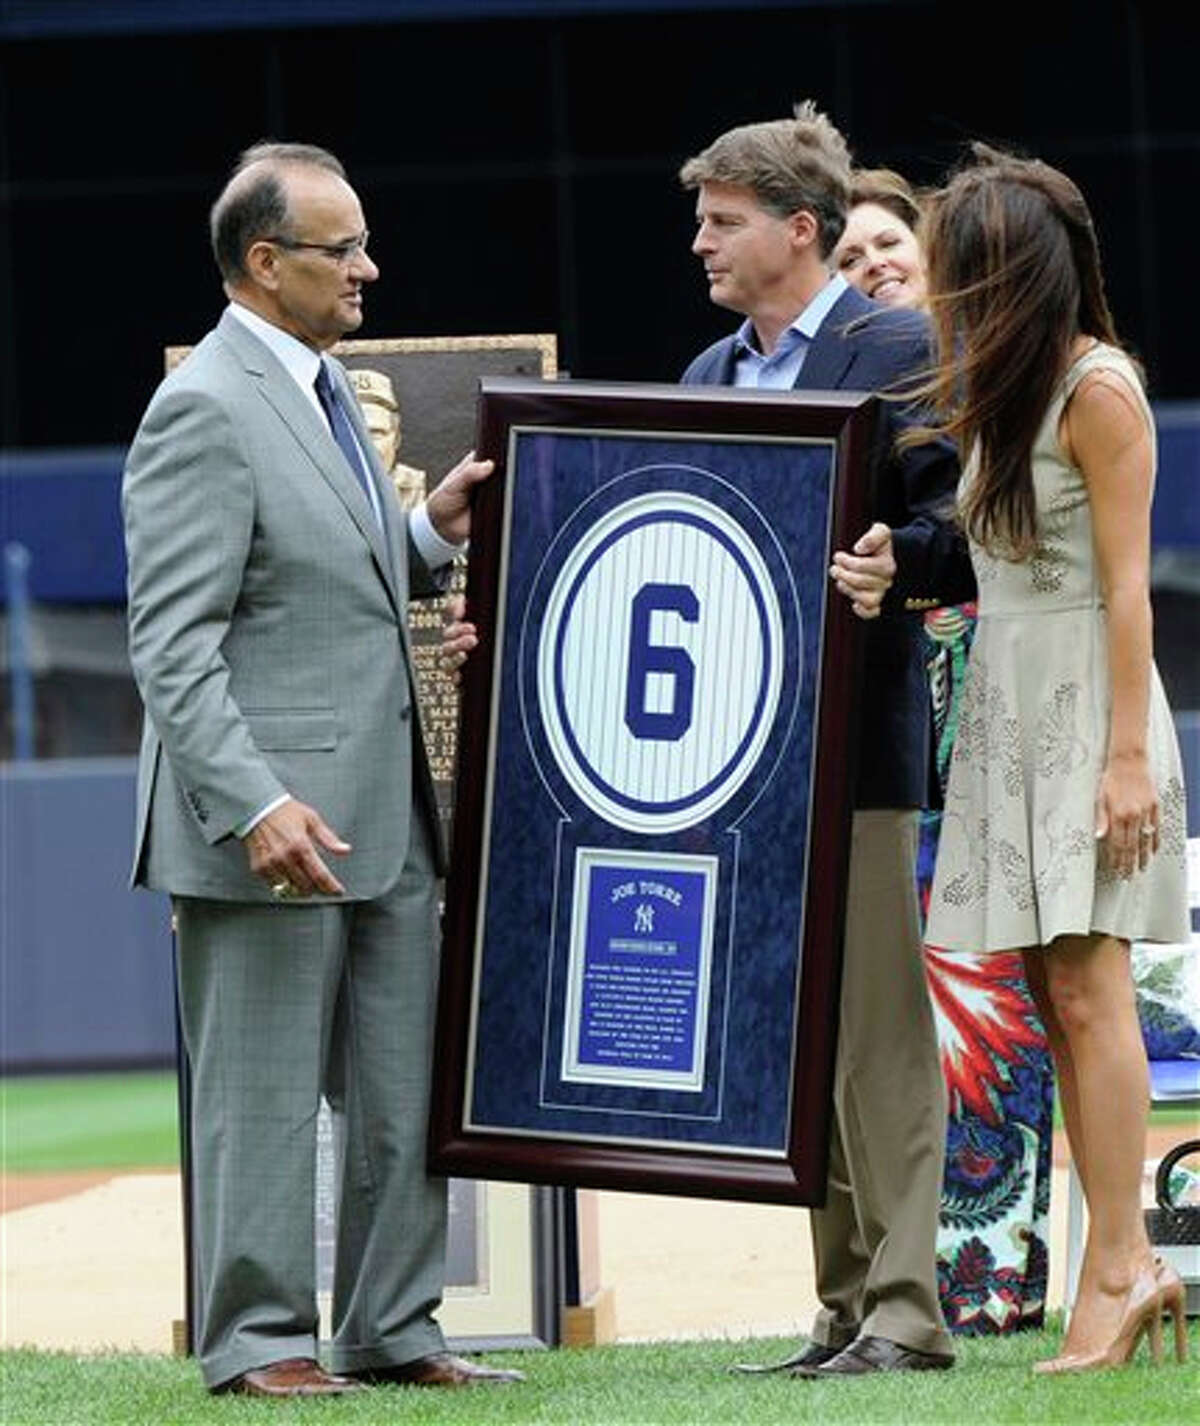 New York Yankees owner Hal Steinbrenner presents Joe Torre, right, with a plaque of his retired number before a baseball game against the Chicago White Sox Saturday, Aug. 23, 2014, at Yankee Stadium in New York.